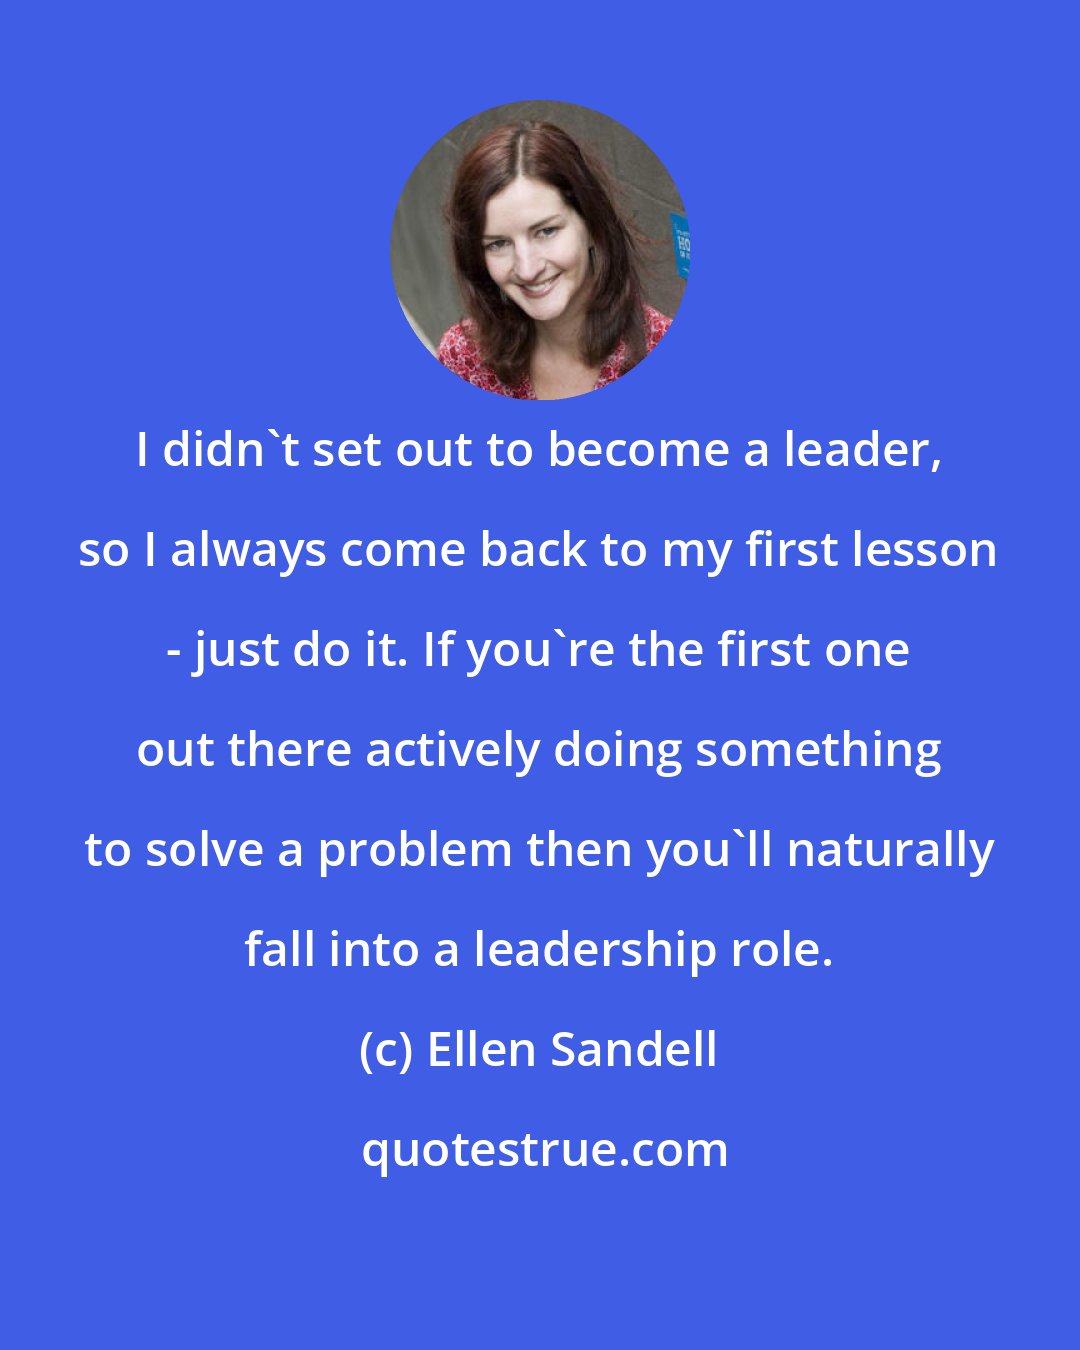 Ellen Sandell: I didn't set out to become a leader, so I always come back to my first lesson - just do it. If you're the first one out there actively doing something to solve a problem then you'll naturally fall into a leadership role.